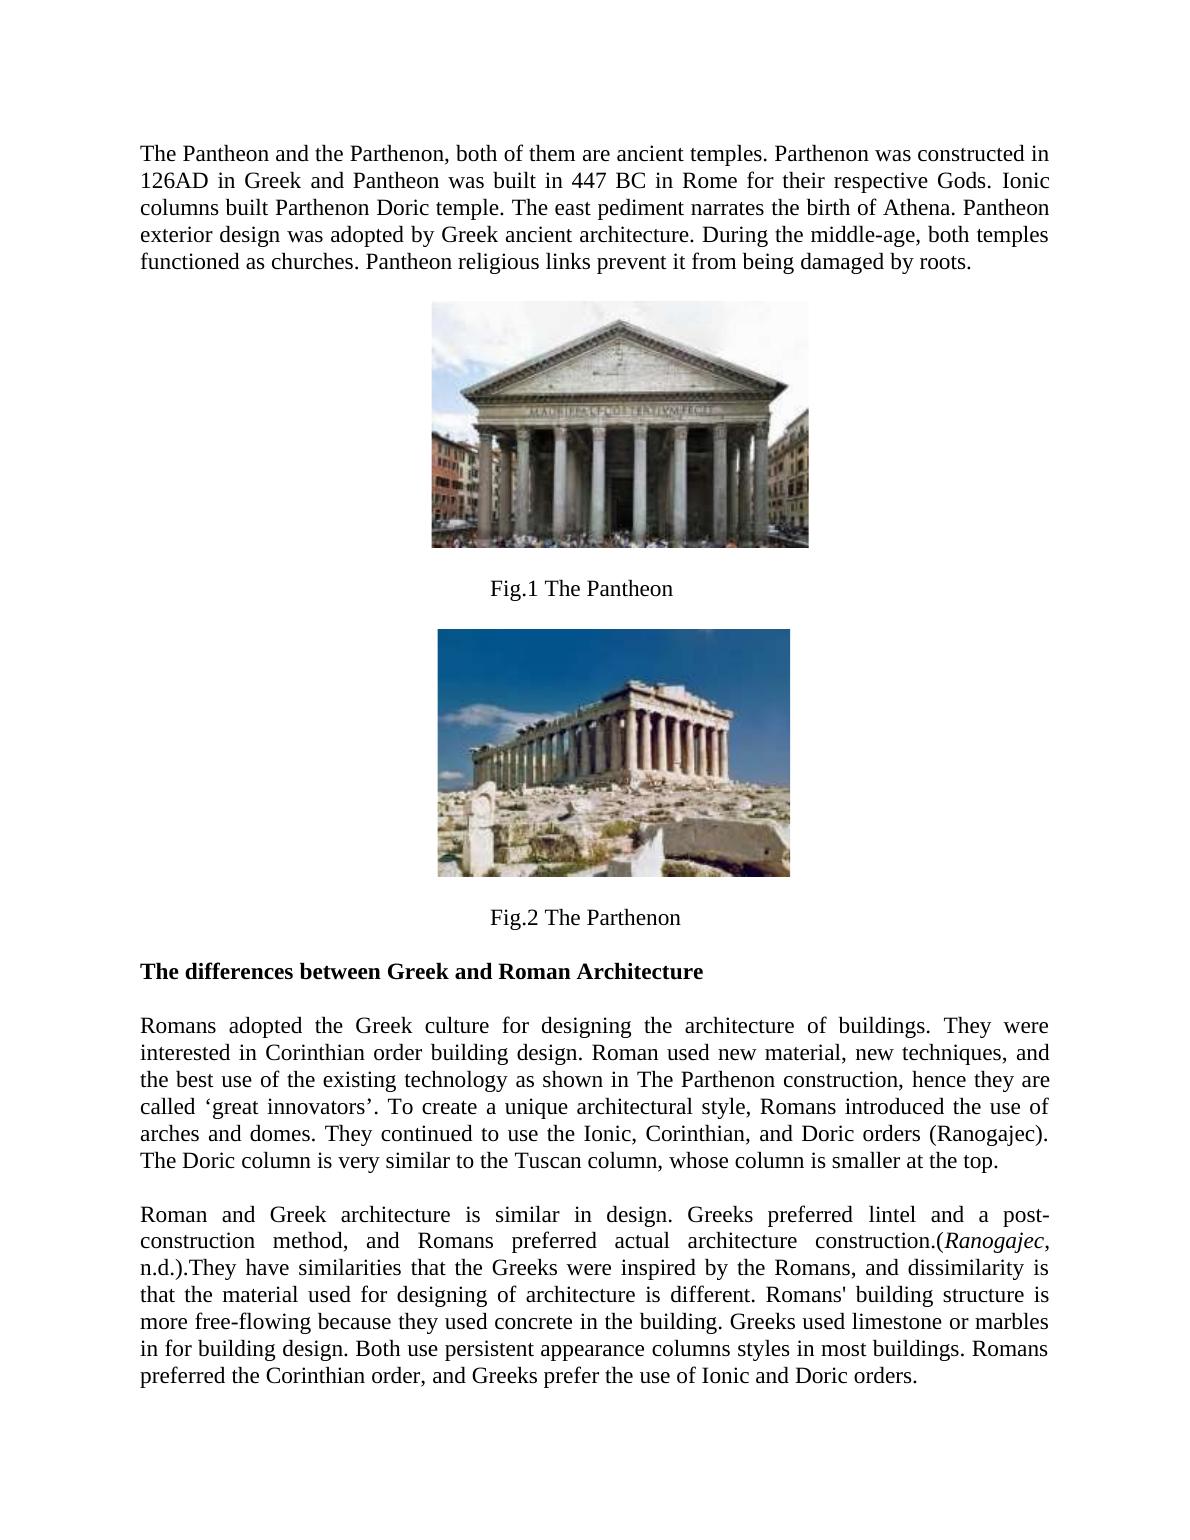 The Differences between Greek and Roman Architecture_2